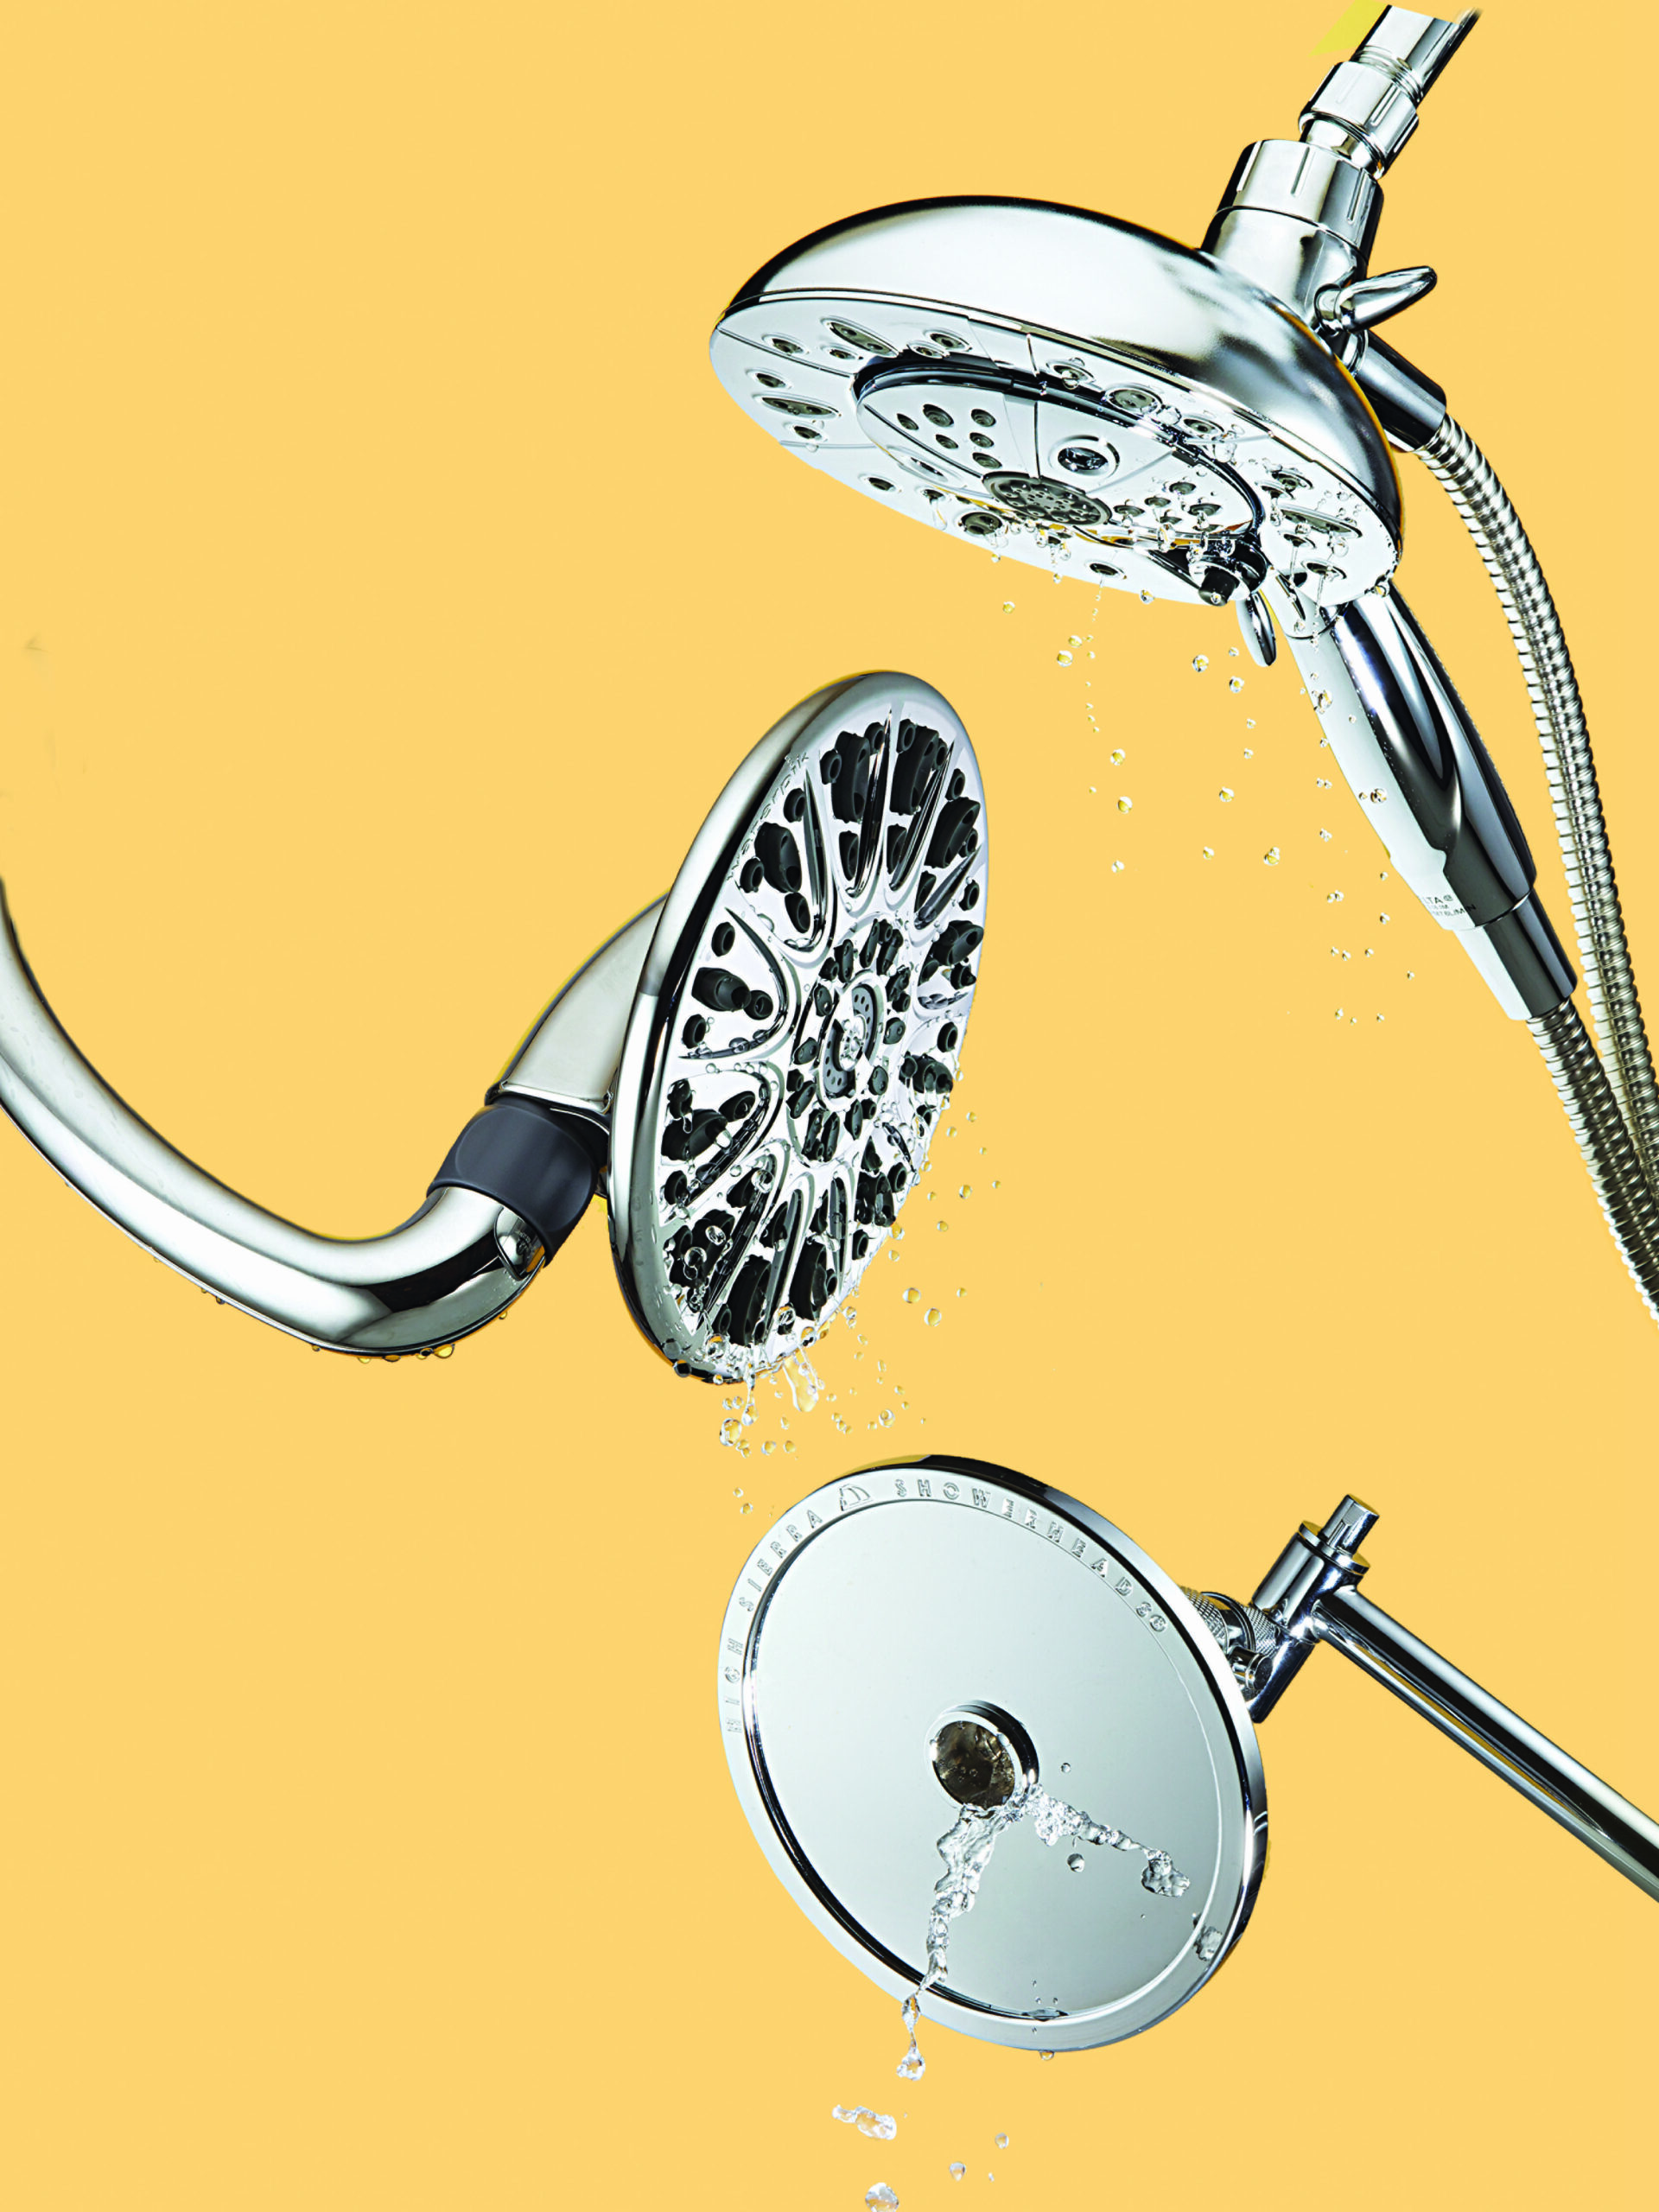 Low-flow showerheads that turn drips into deluges